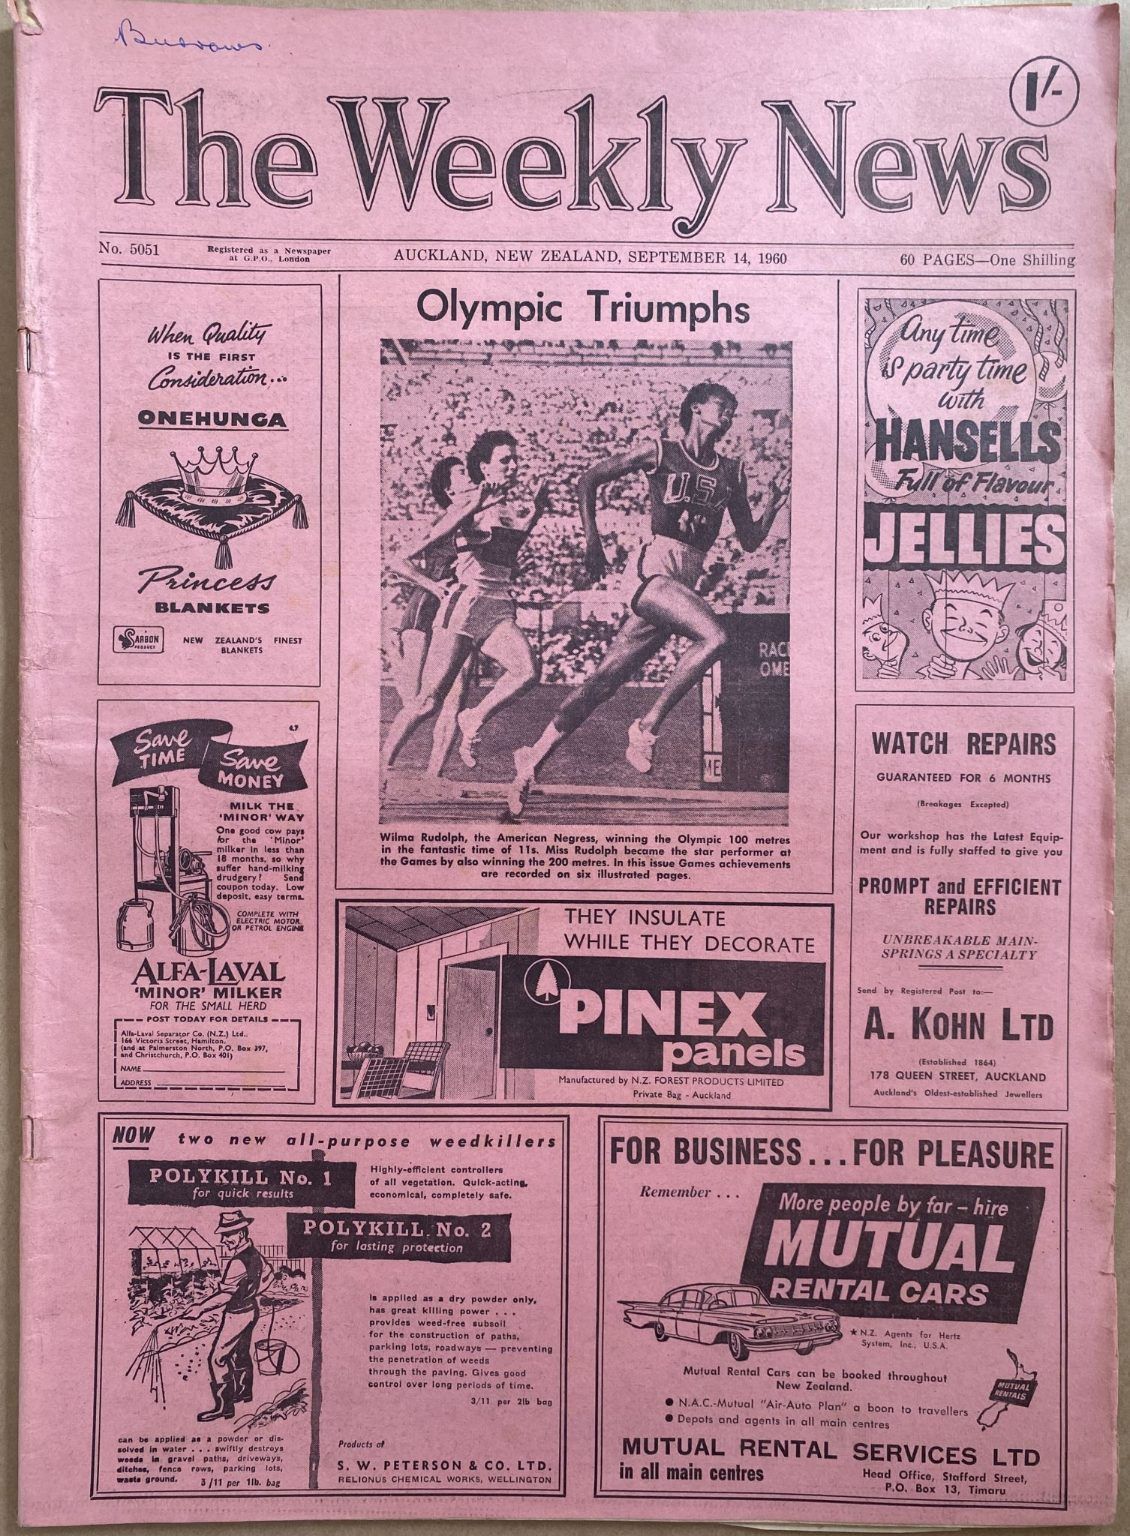 OLD NEWSPAPER: The Weekly News, No. 5051, 14 September 1960